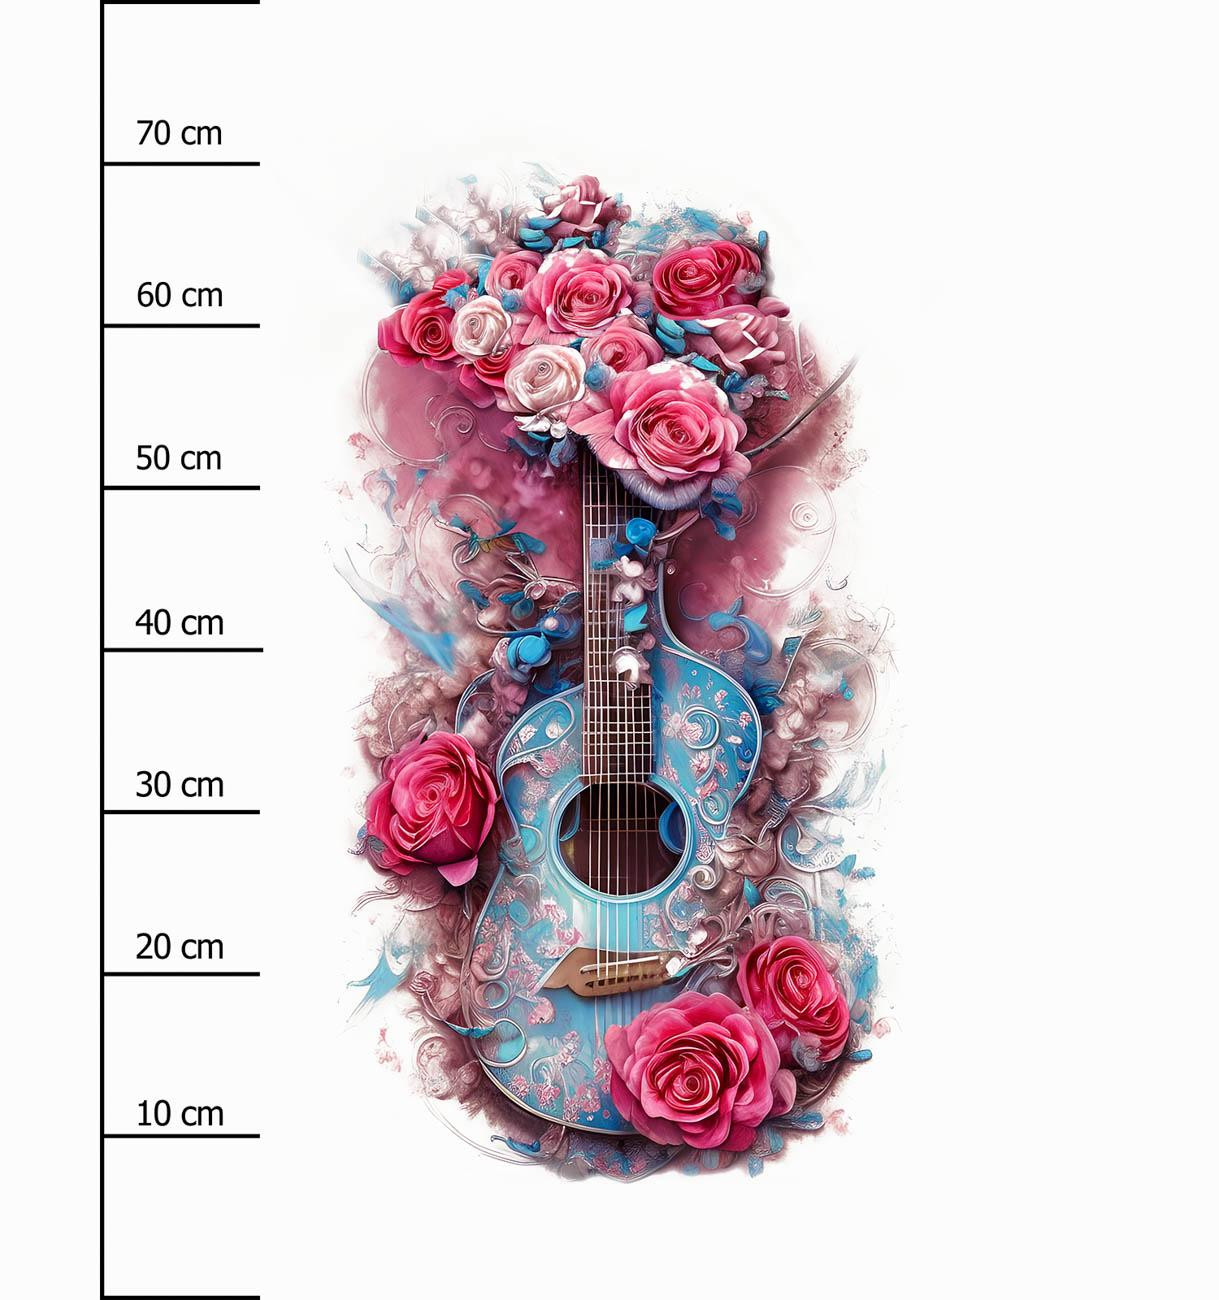 GUITAR WITH ROSES - panel (75cm x 80cm) SINGLE JERSEY PANEL